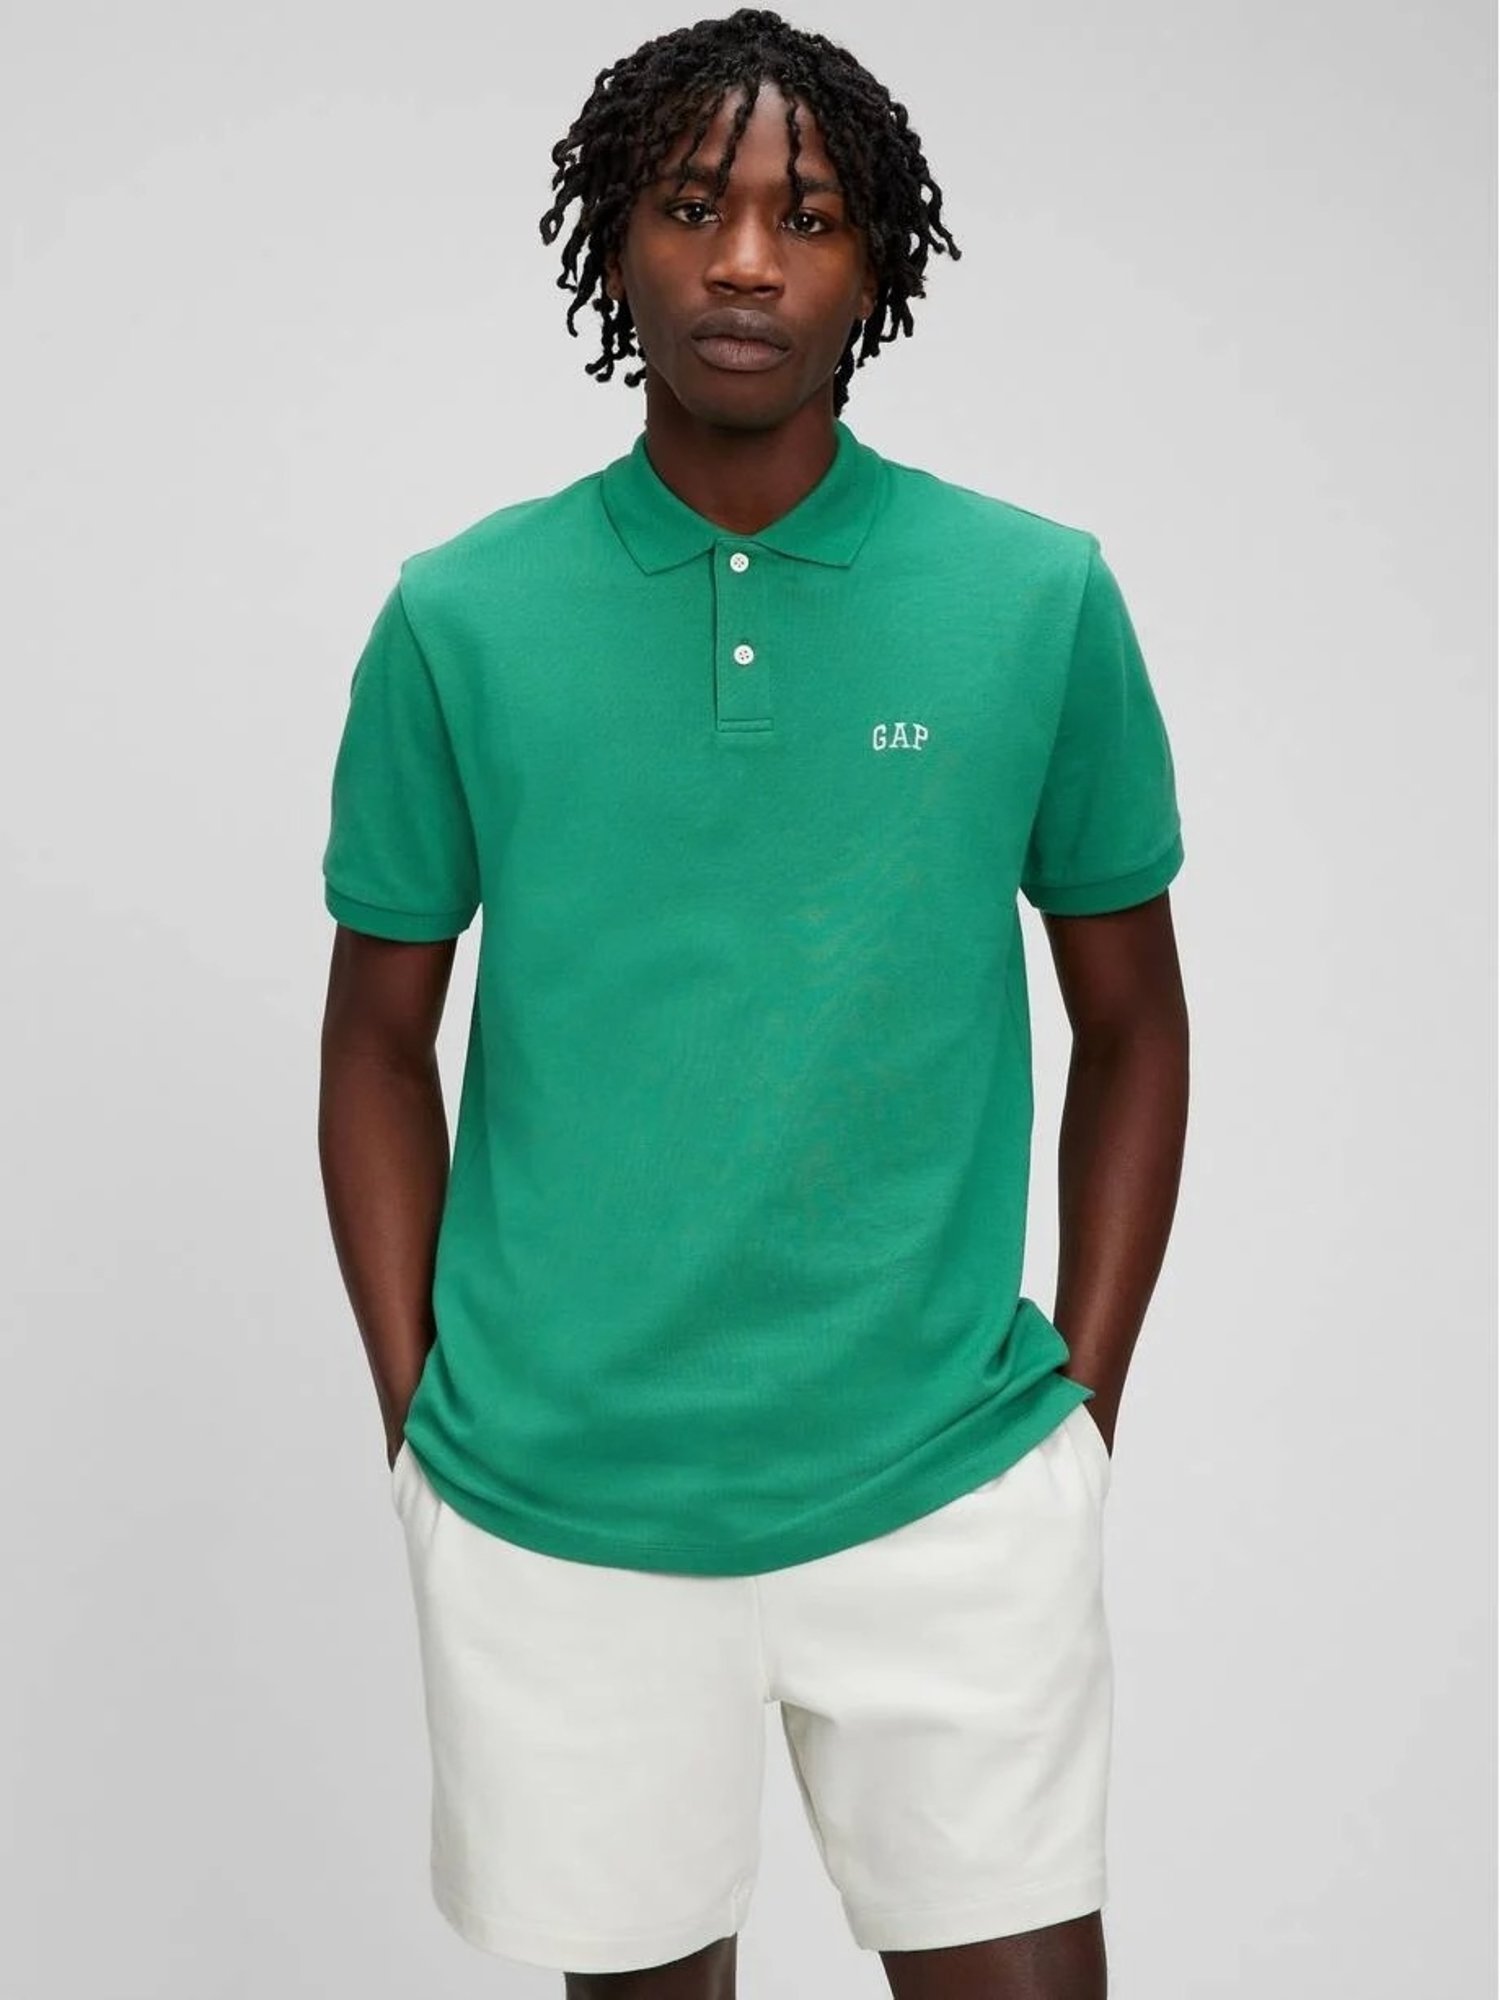 Gap Logo All Day Polo T-Shirt product image